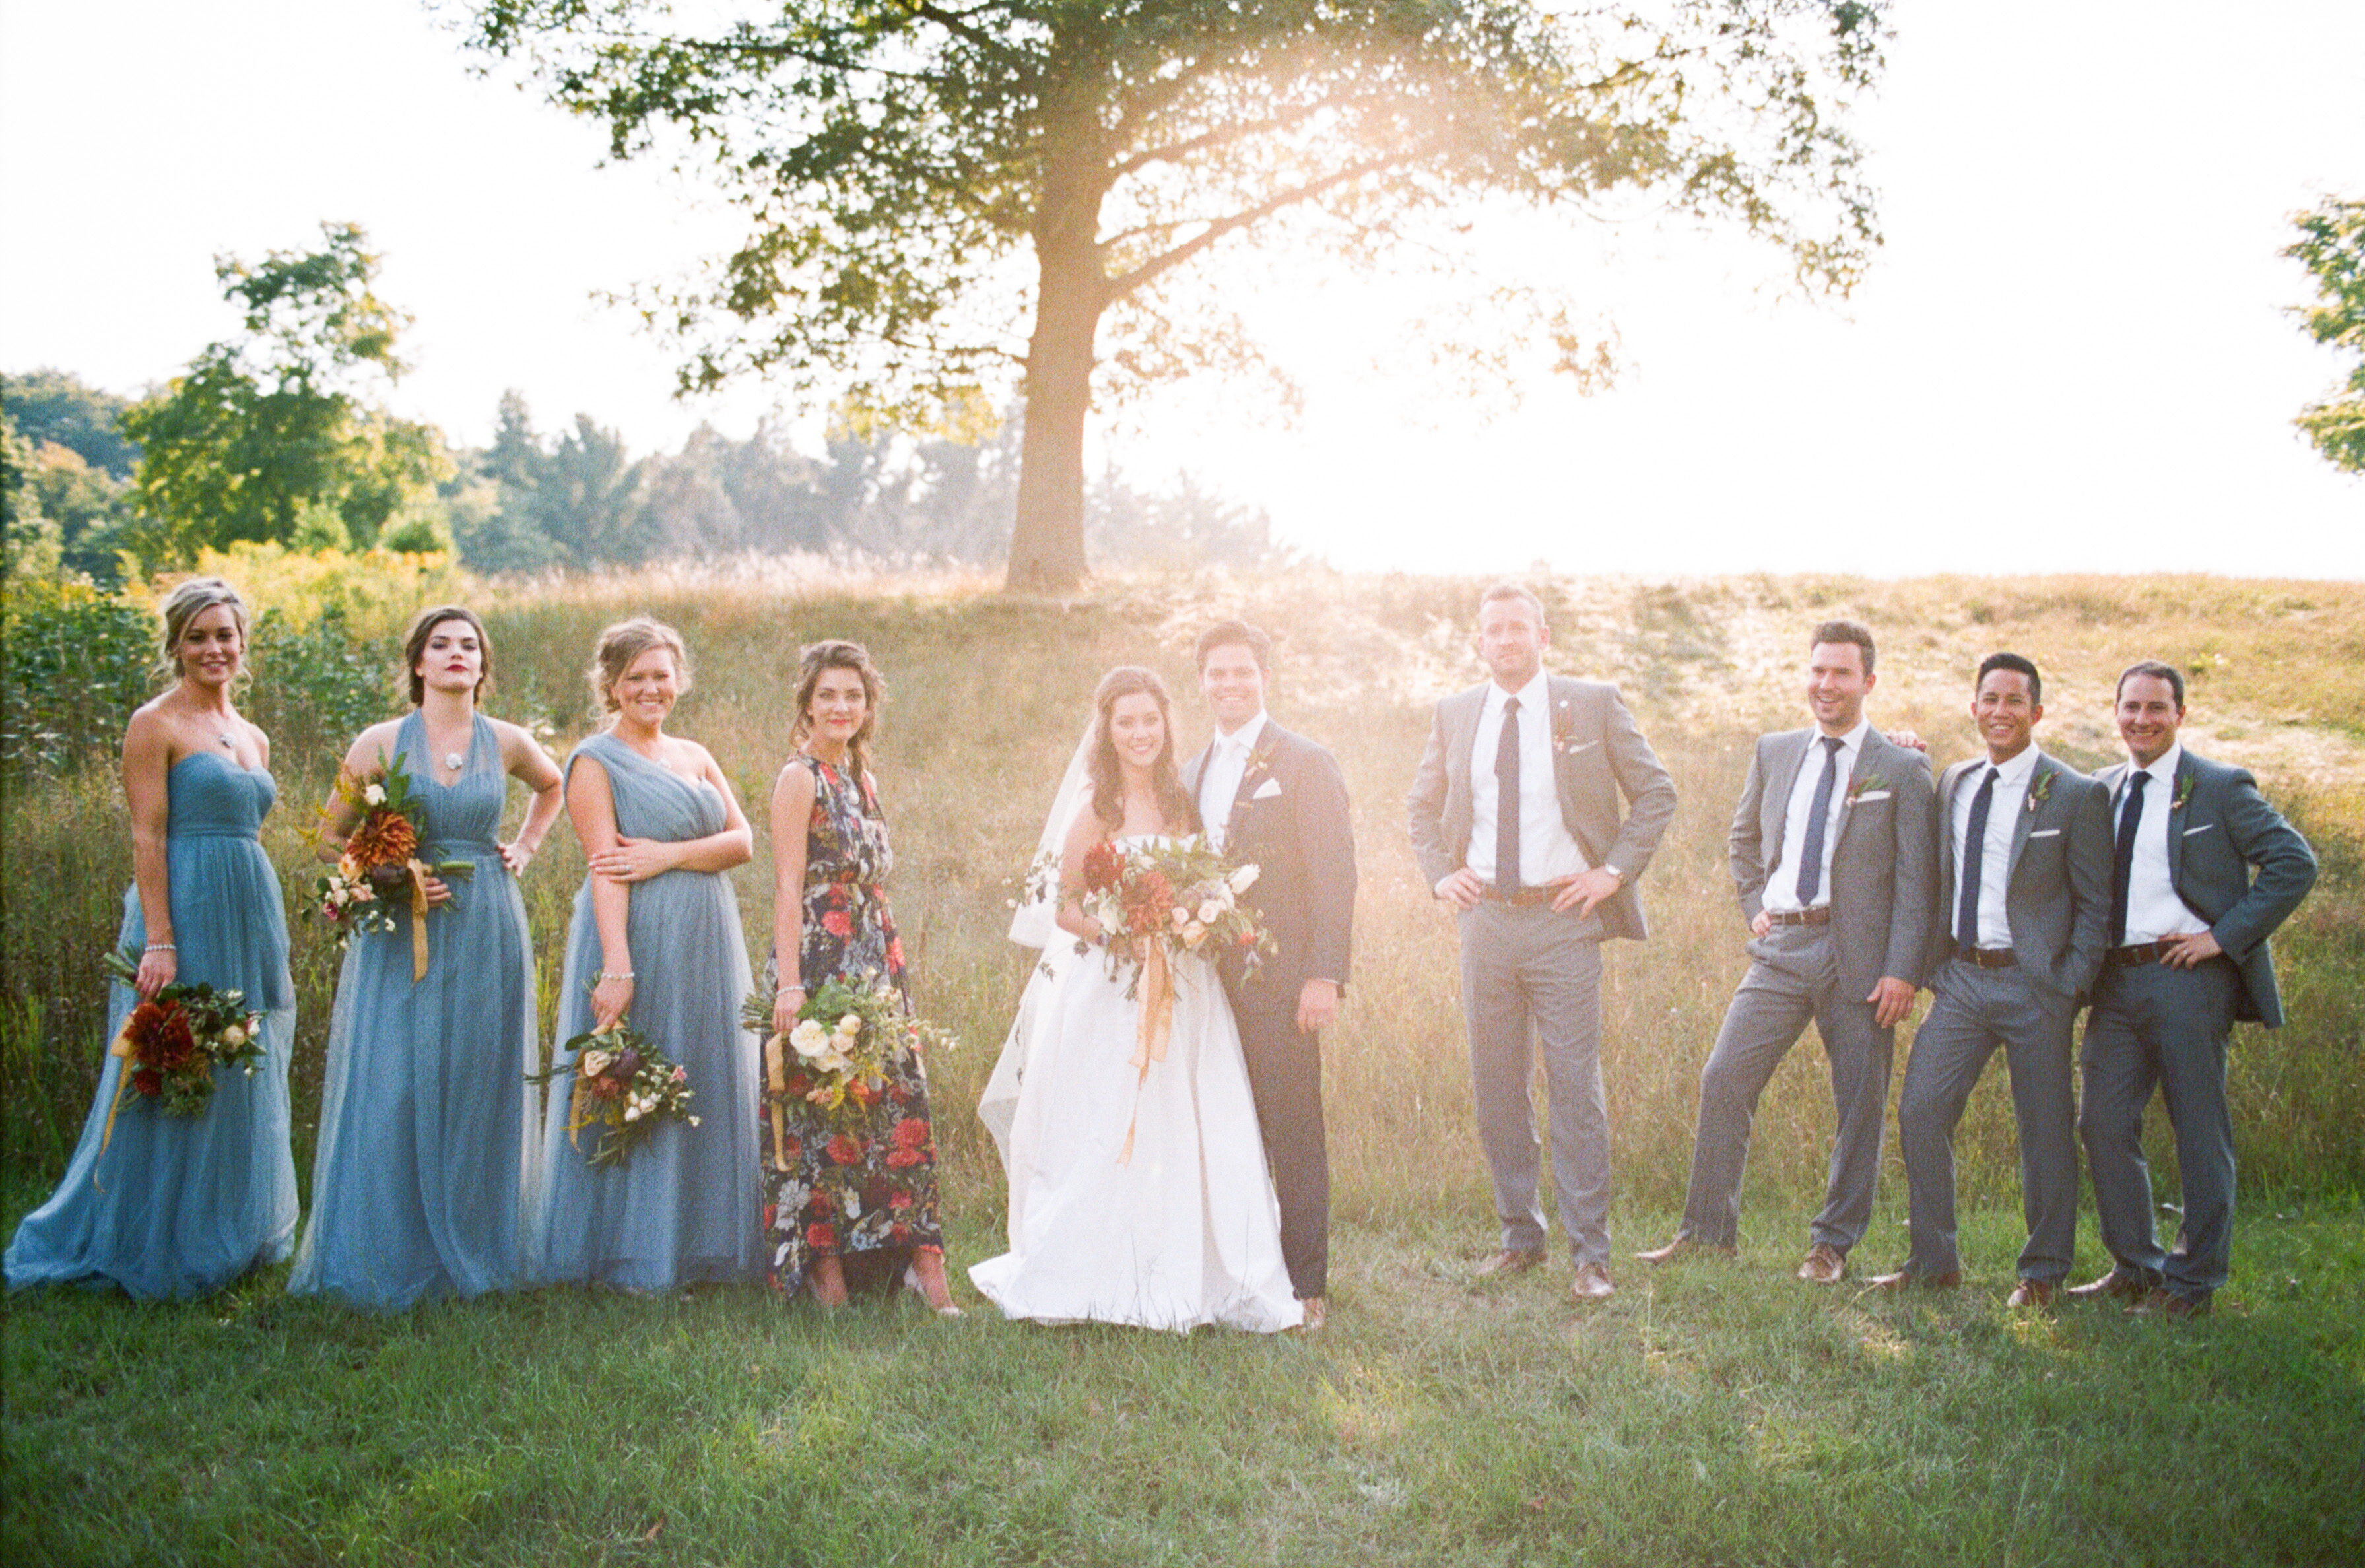 Dusty Blue Wedding | The Day's Design | Cory Weber Photography